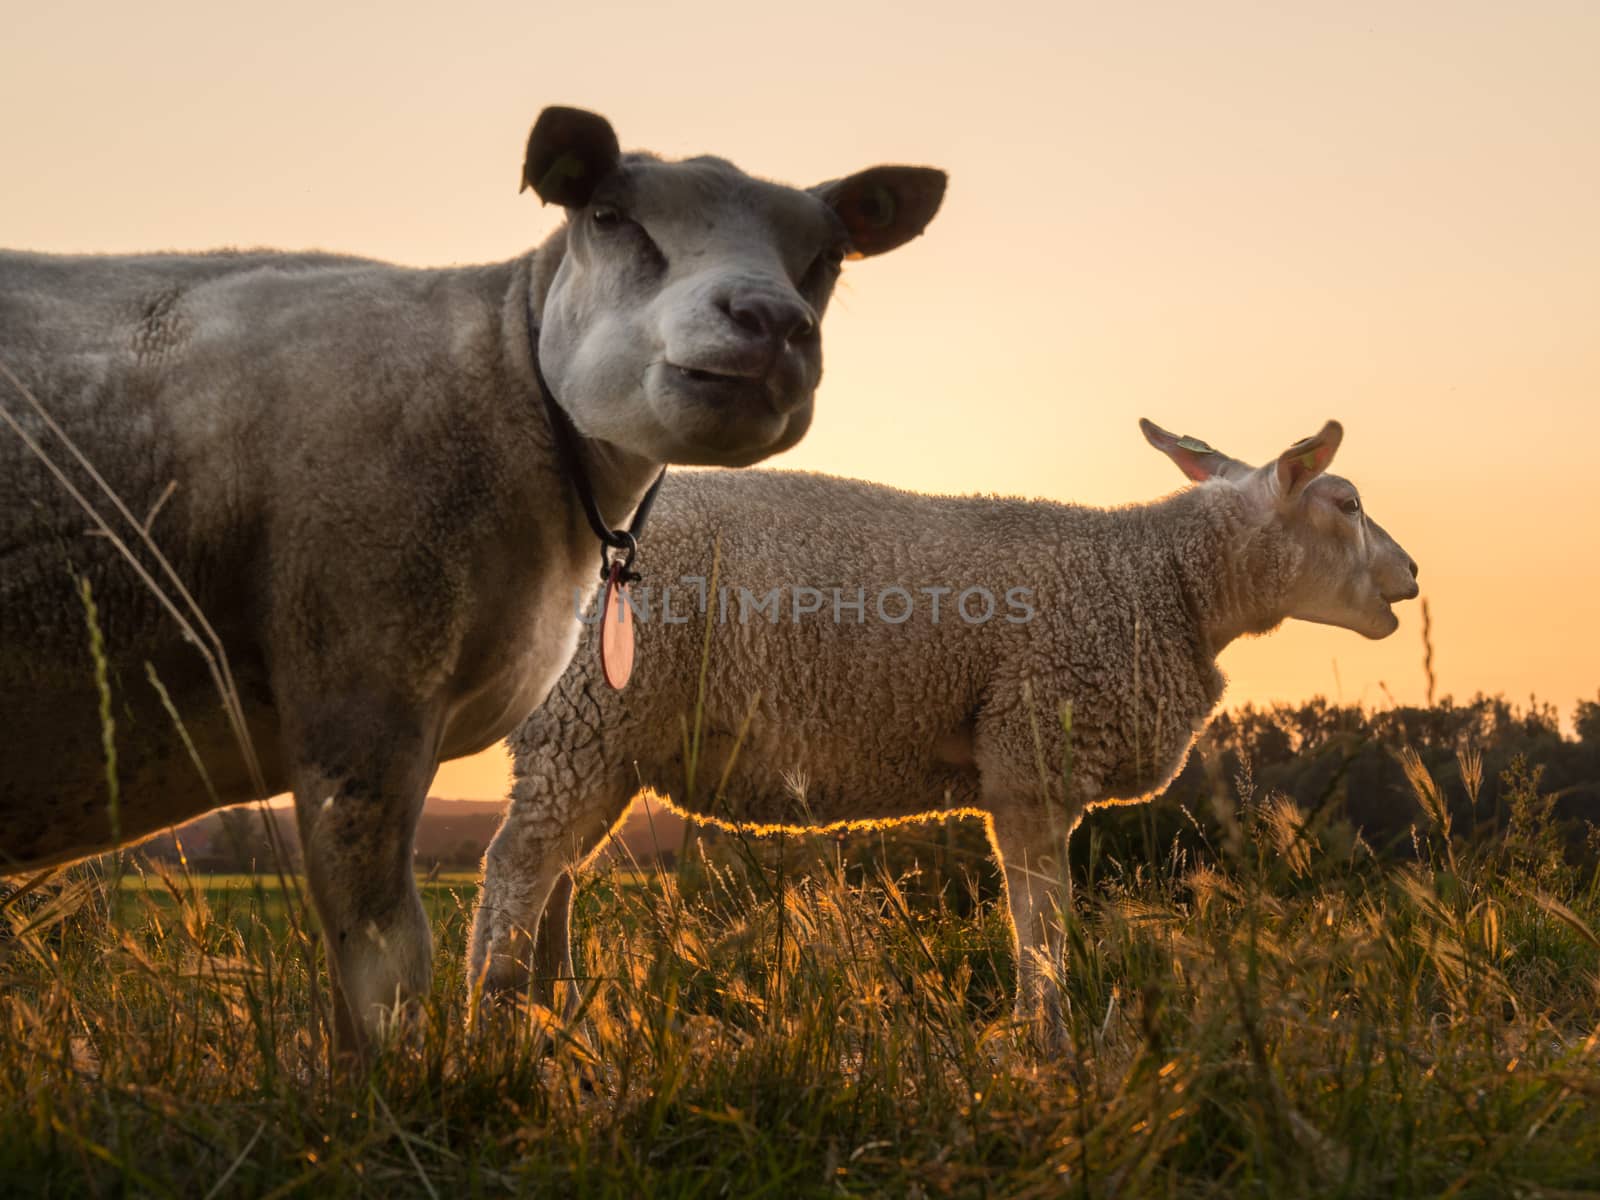 Just before the sun goes down the sheep come out to graze. This produced a lovely light around this pair of sheep!